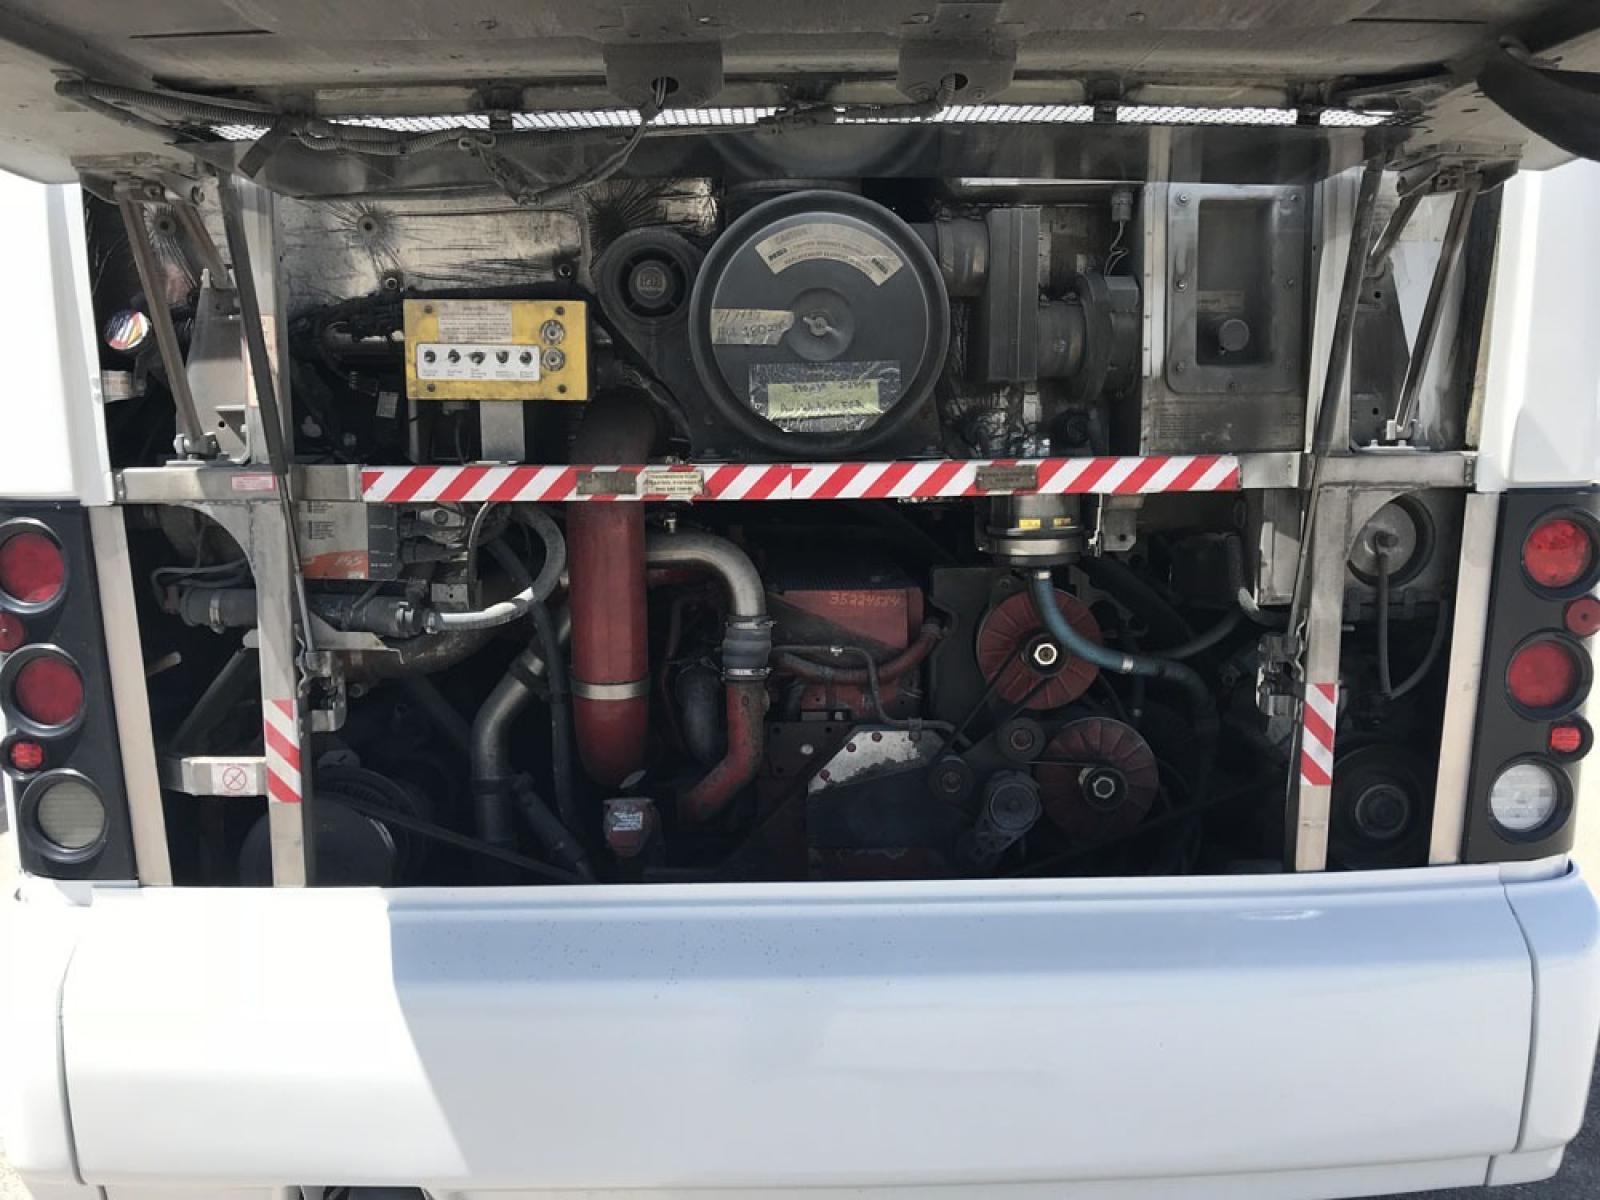 2008 White MCI J4500 with an Cummins ISM engine, ZF AUTO transmission, 0.000000, 0.000000 - 2008 MCI J4500 - Cummins ISM Diesel Engine - ZF Auto Trans. - 45' -- 56 Passengers -- Seat Belts - Flat Screens and DVD - Aluminum Wheels - Enclosed parcel racks – Restroom - Photo #7